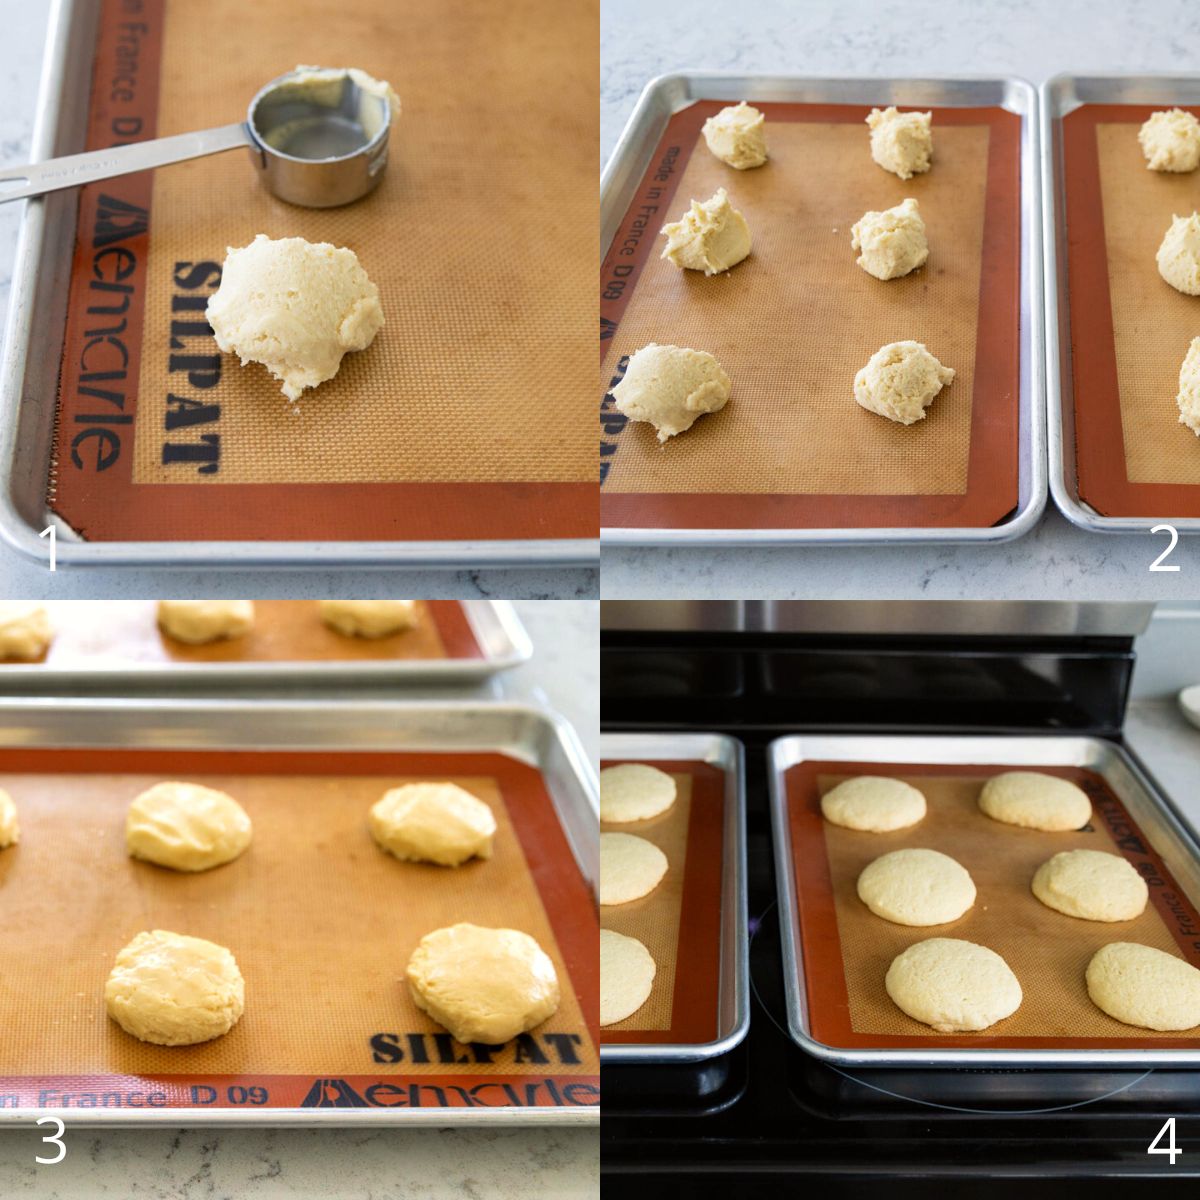 The step by step photos show how to portion the dough and bake them on cookie sheets.